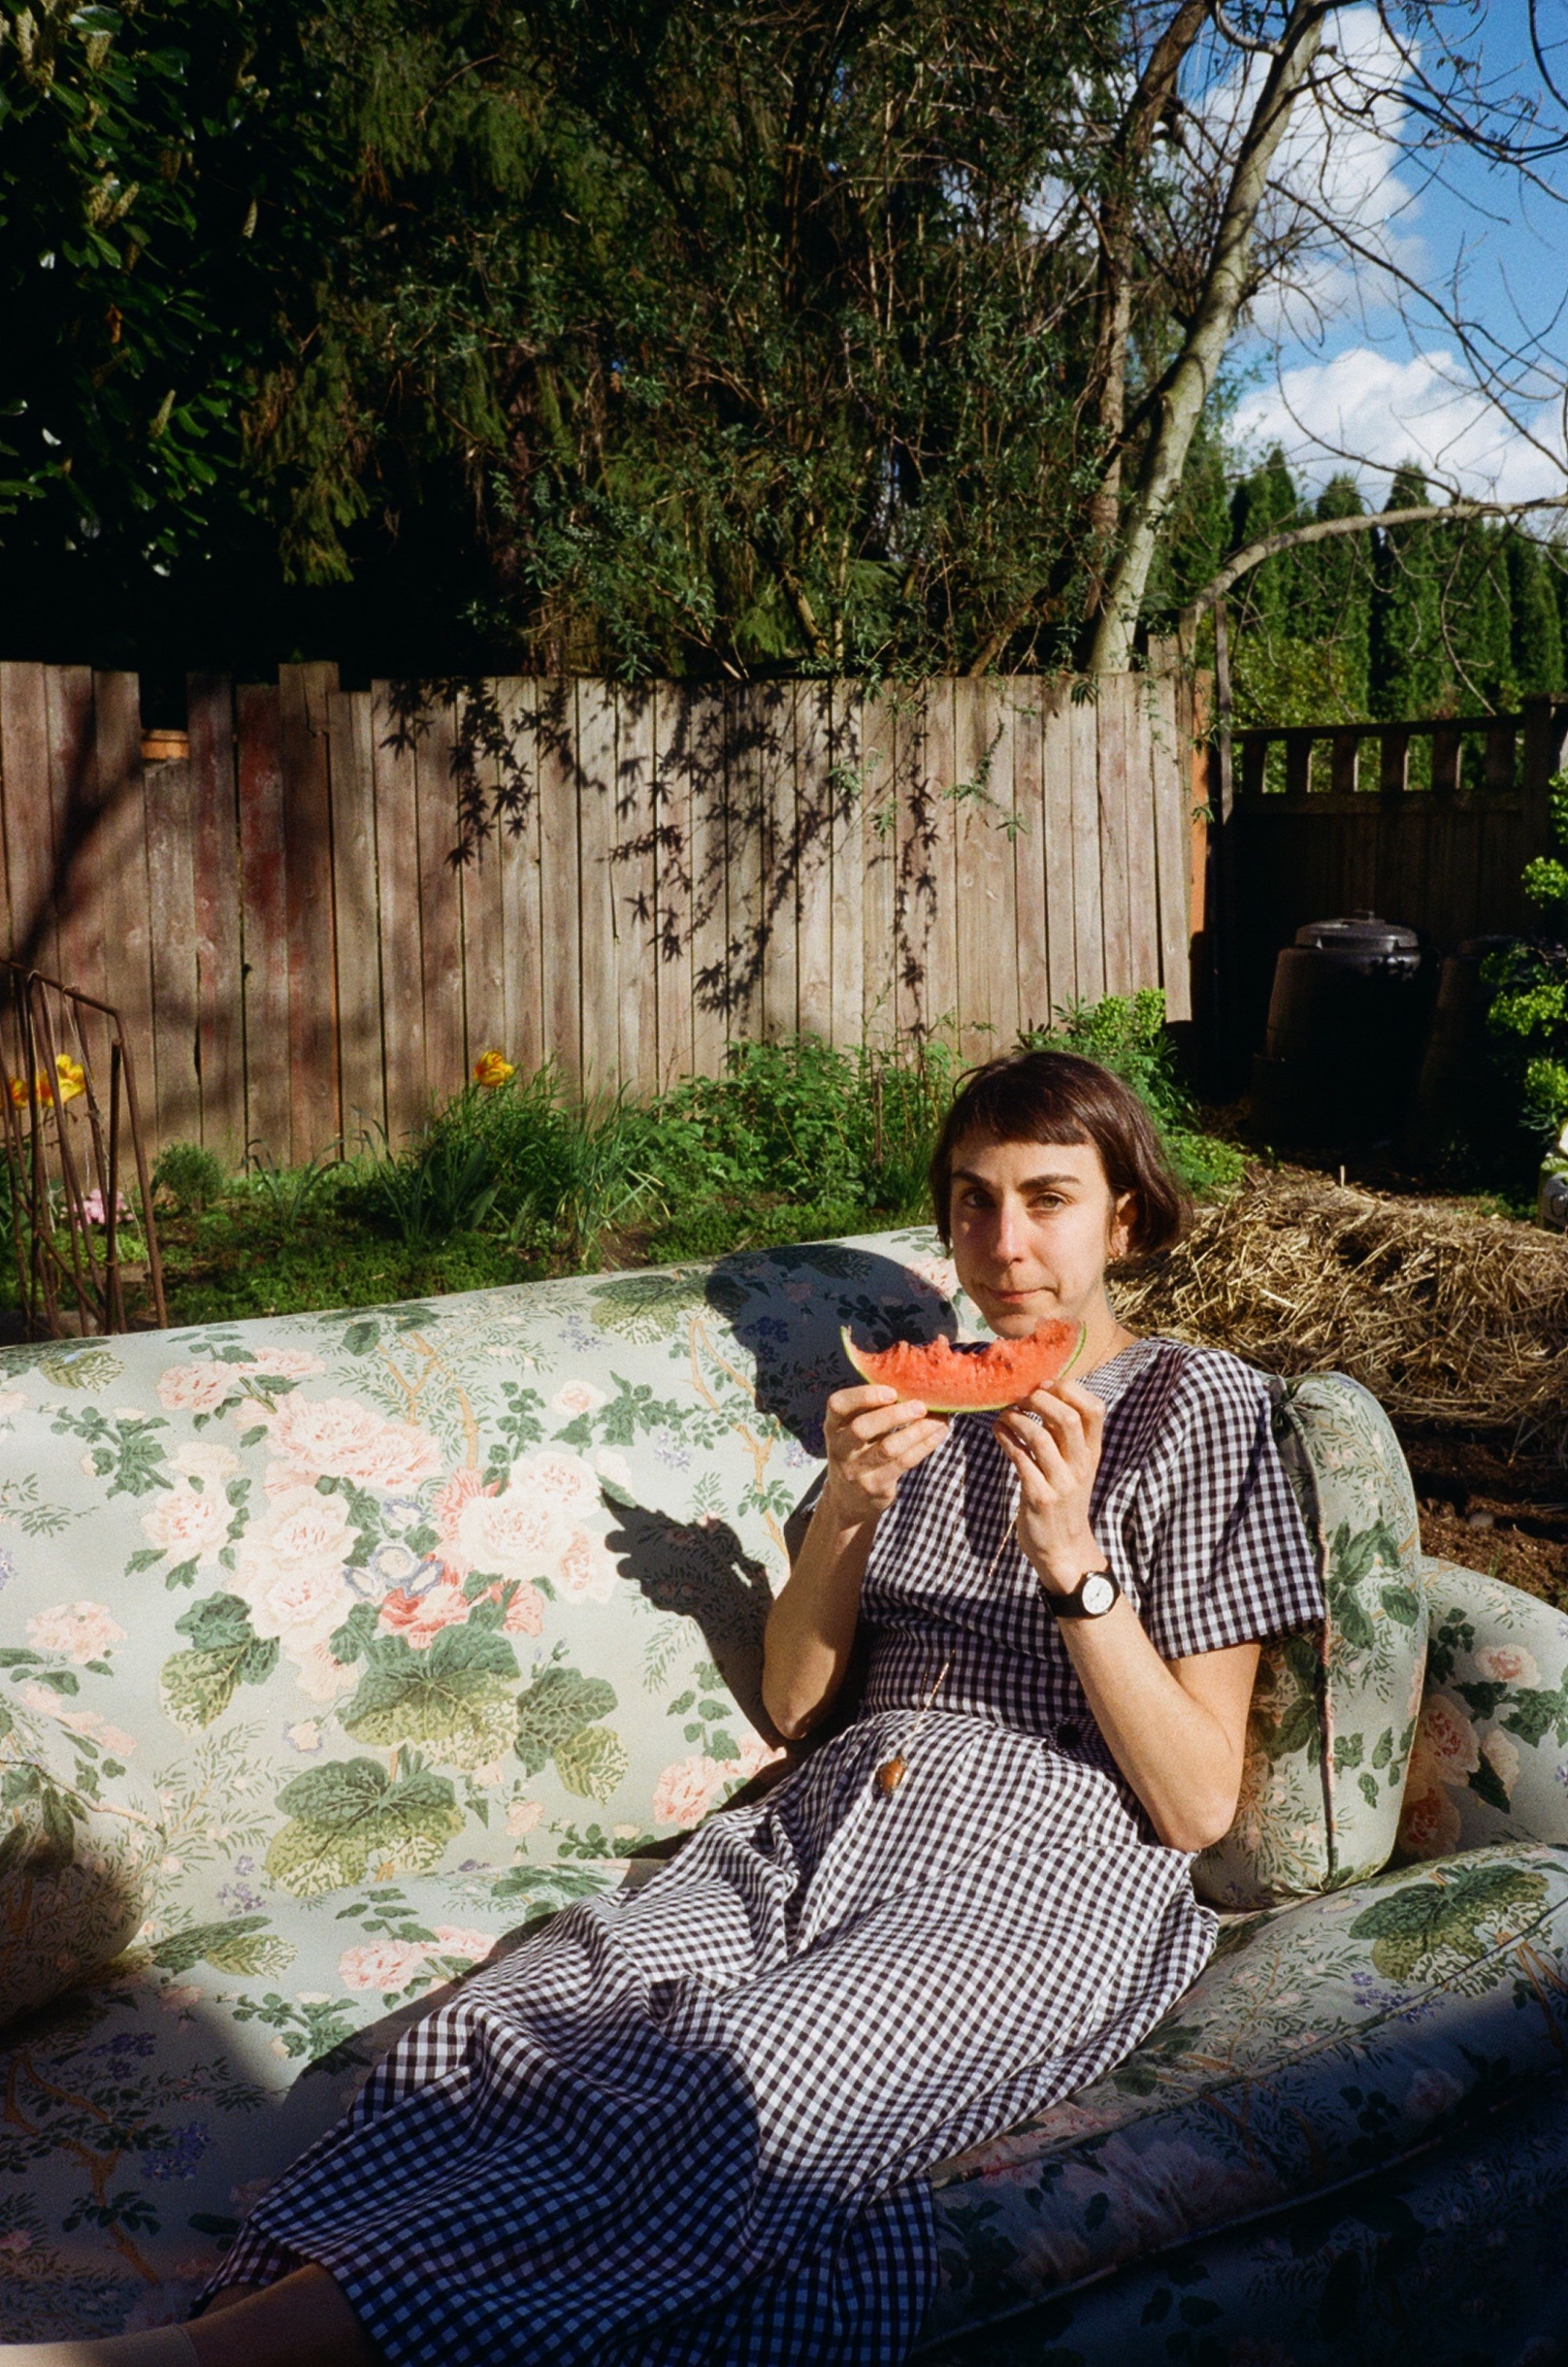 Molly Schaeffer is featured in a portrait-oriented photograph, outside on a floral couch, reclining upright on the couch with her legs coming towards the at an angle. She wears a sundress and is holding a piece of watermelon with her two hands. Behind is a yard with a tall wooden fence, bright green grass and trees, and in the right corner, blue sky and clouds.